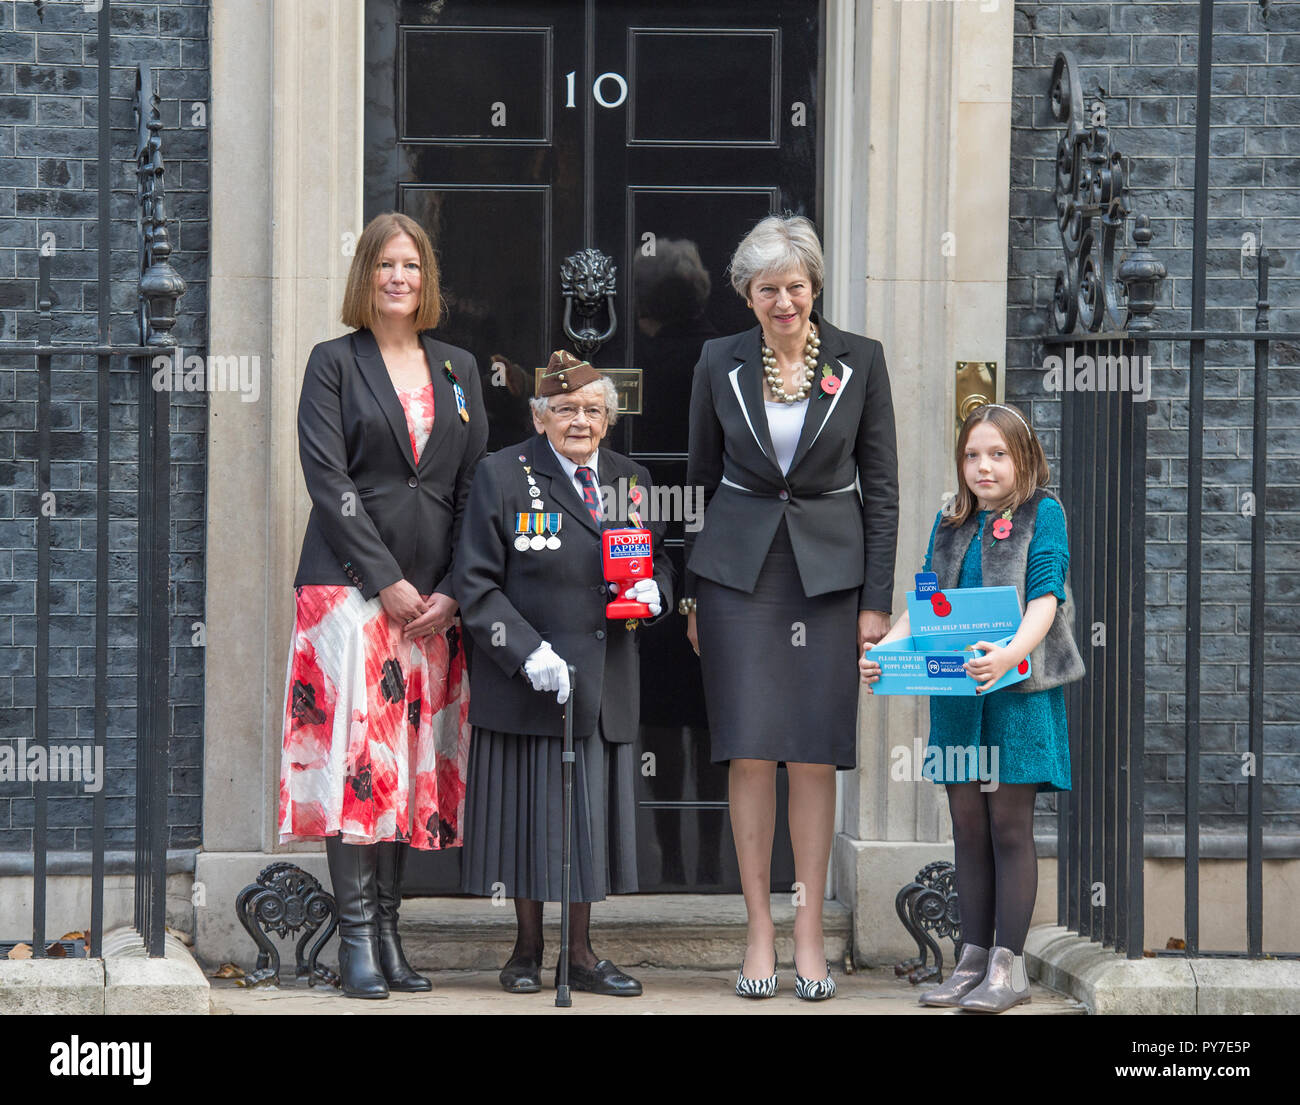 10 Downing Street, London, UK. 25 October, 2018. The Prime Minister meets fundraisers for the Royal British Legion and purchases a poppy. Stock Photo